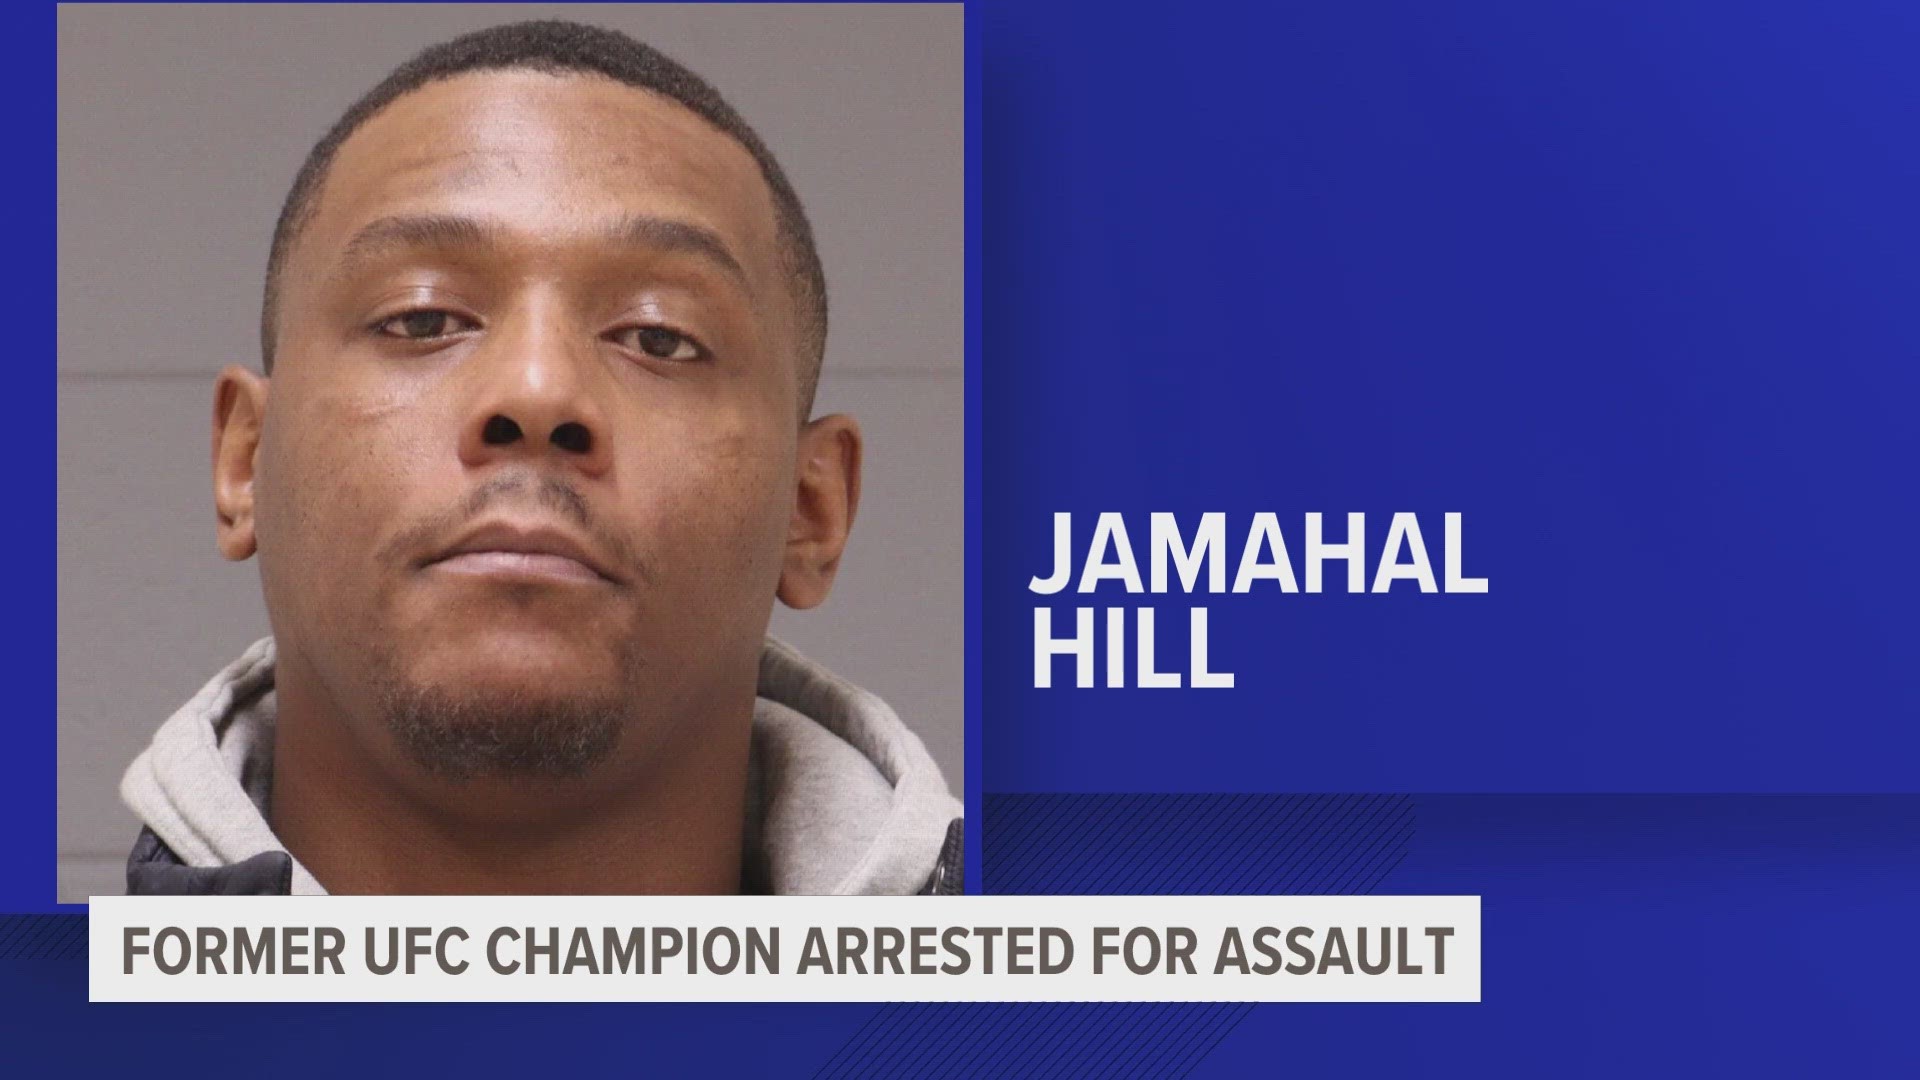 Jamahal Hill, who won the Light Heavyweight title in January, was charged with aggravated domestic violence.